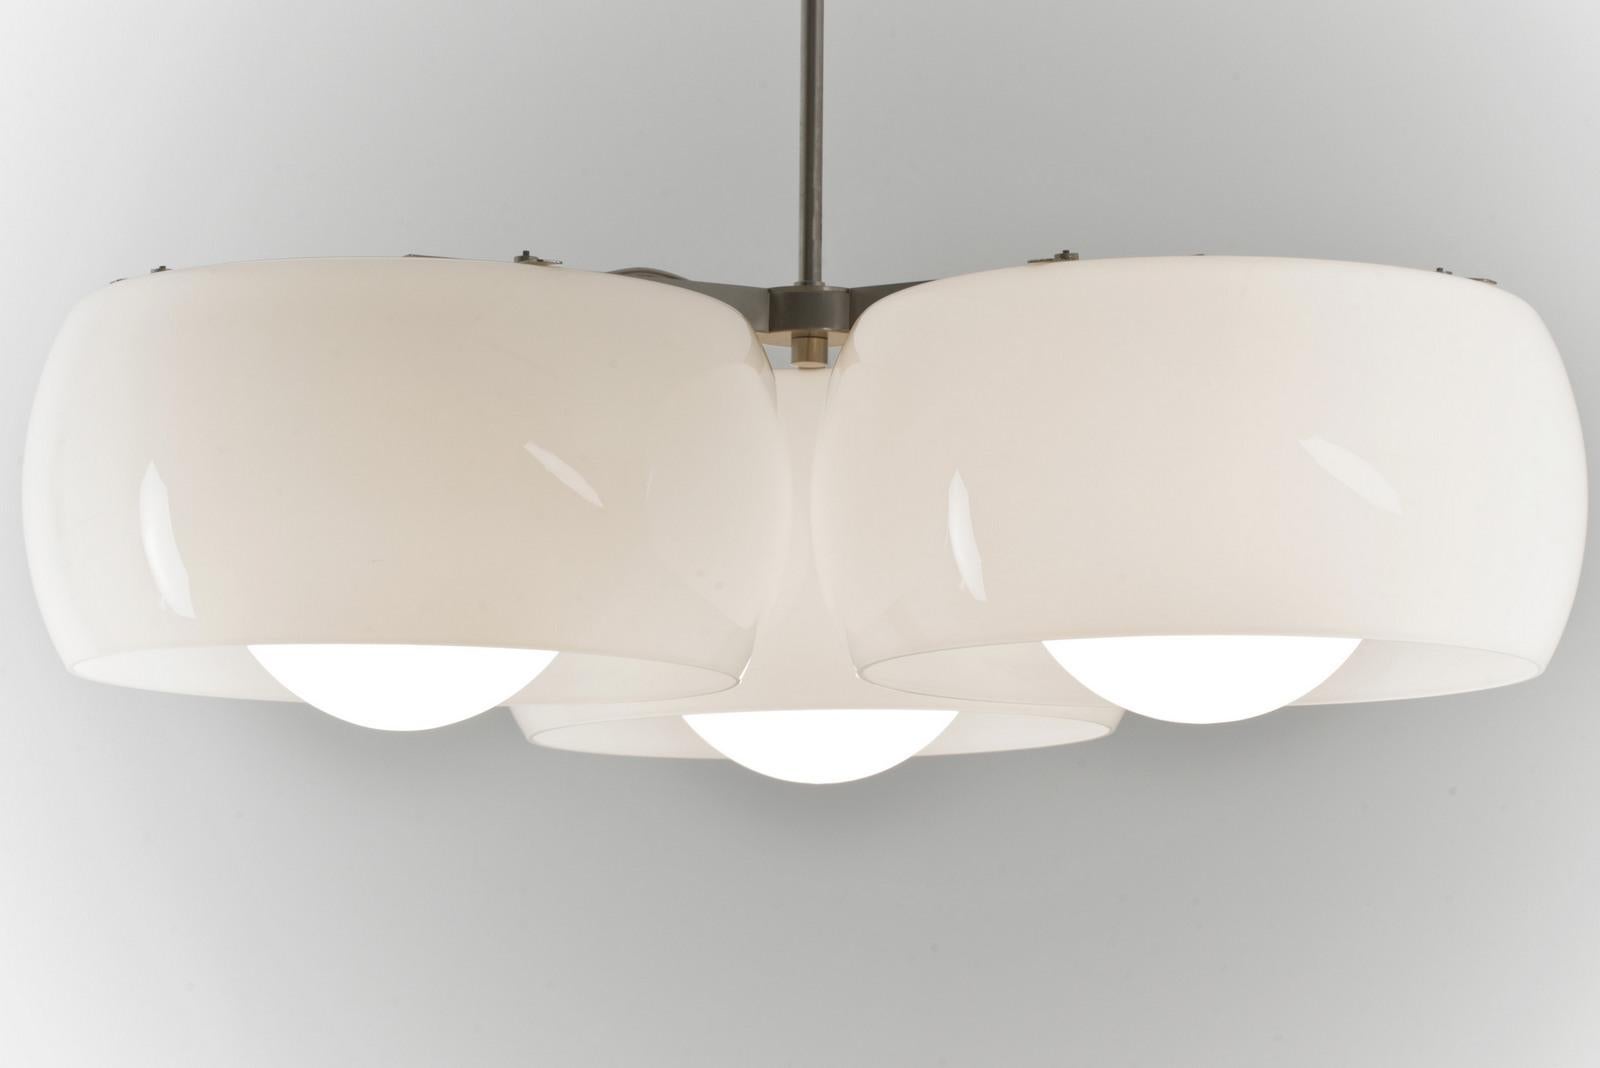 Pendant Lamp by Vico Magistretti for Artemide, Italy - 1961 For Sale 2